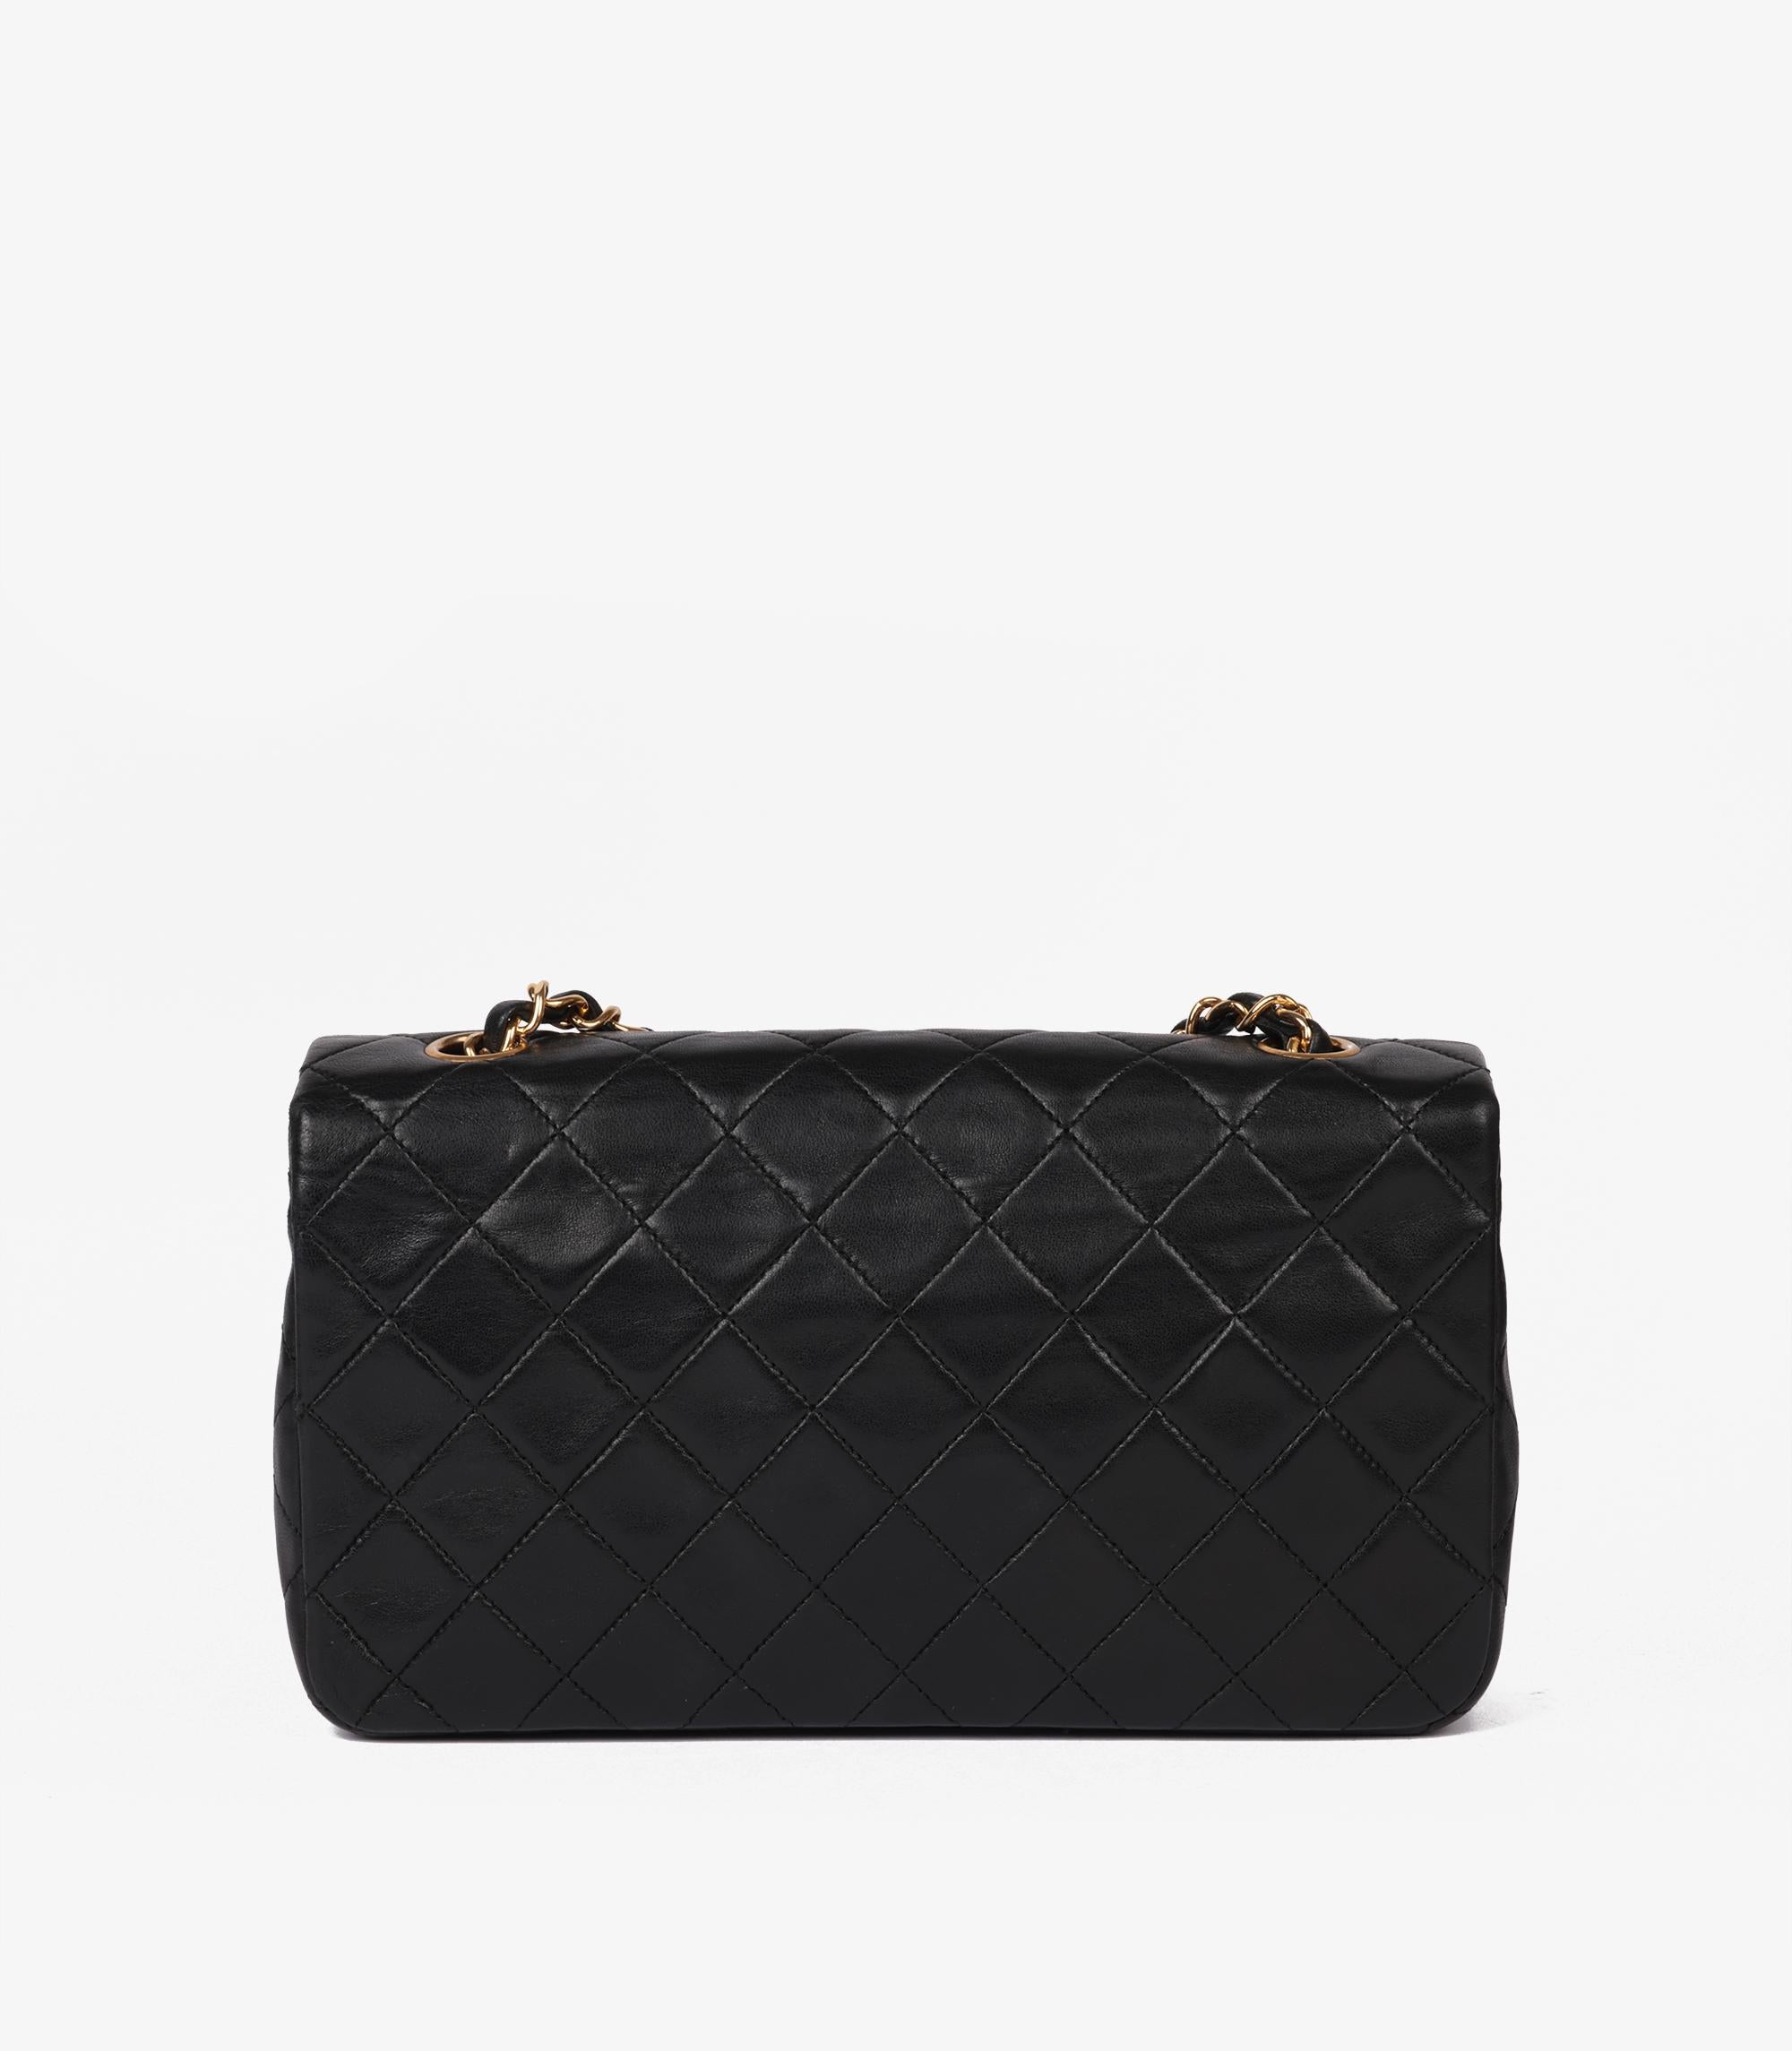 Women's or Men's Chanel Black Quilted Lambskin Vintage Small Classic Single Full Flap Bag